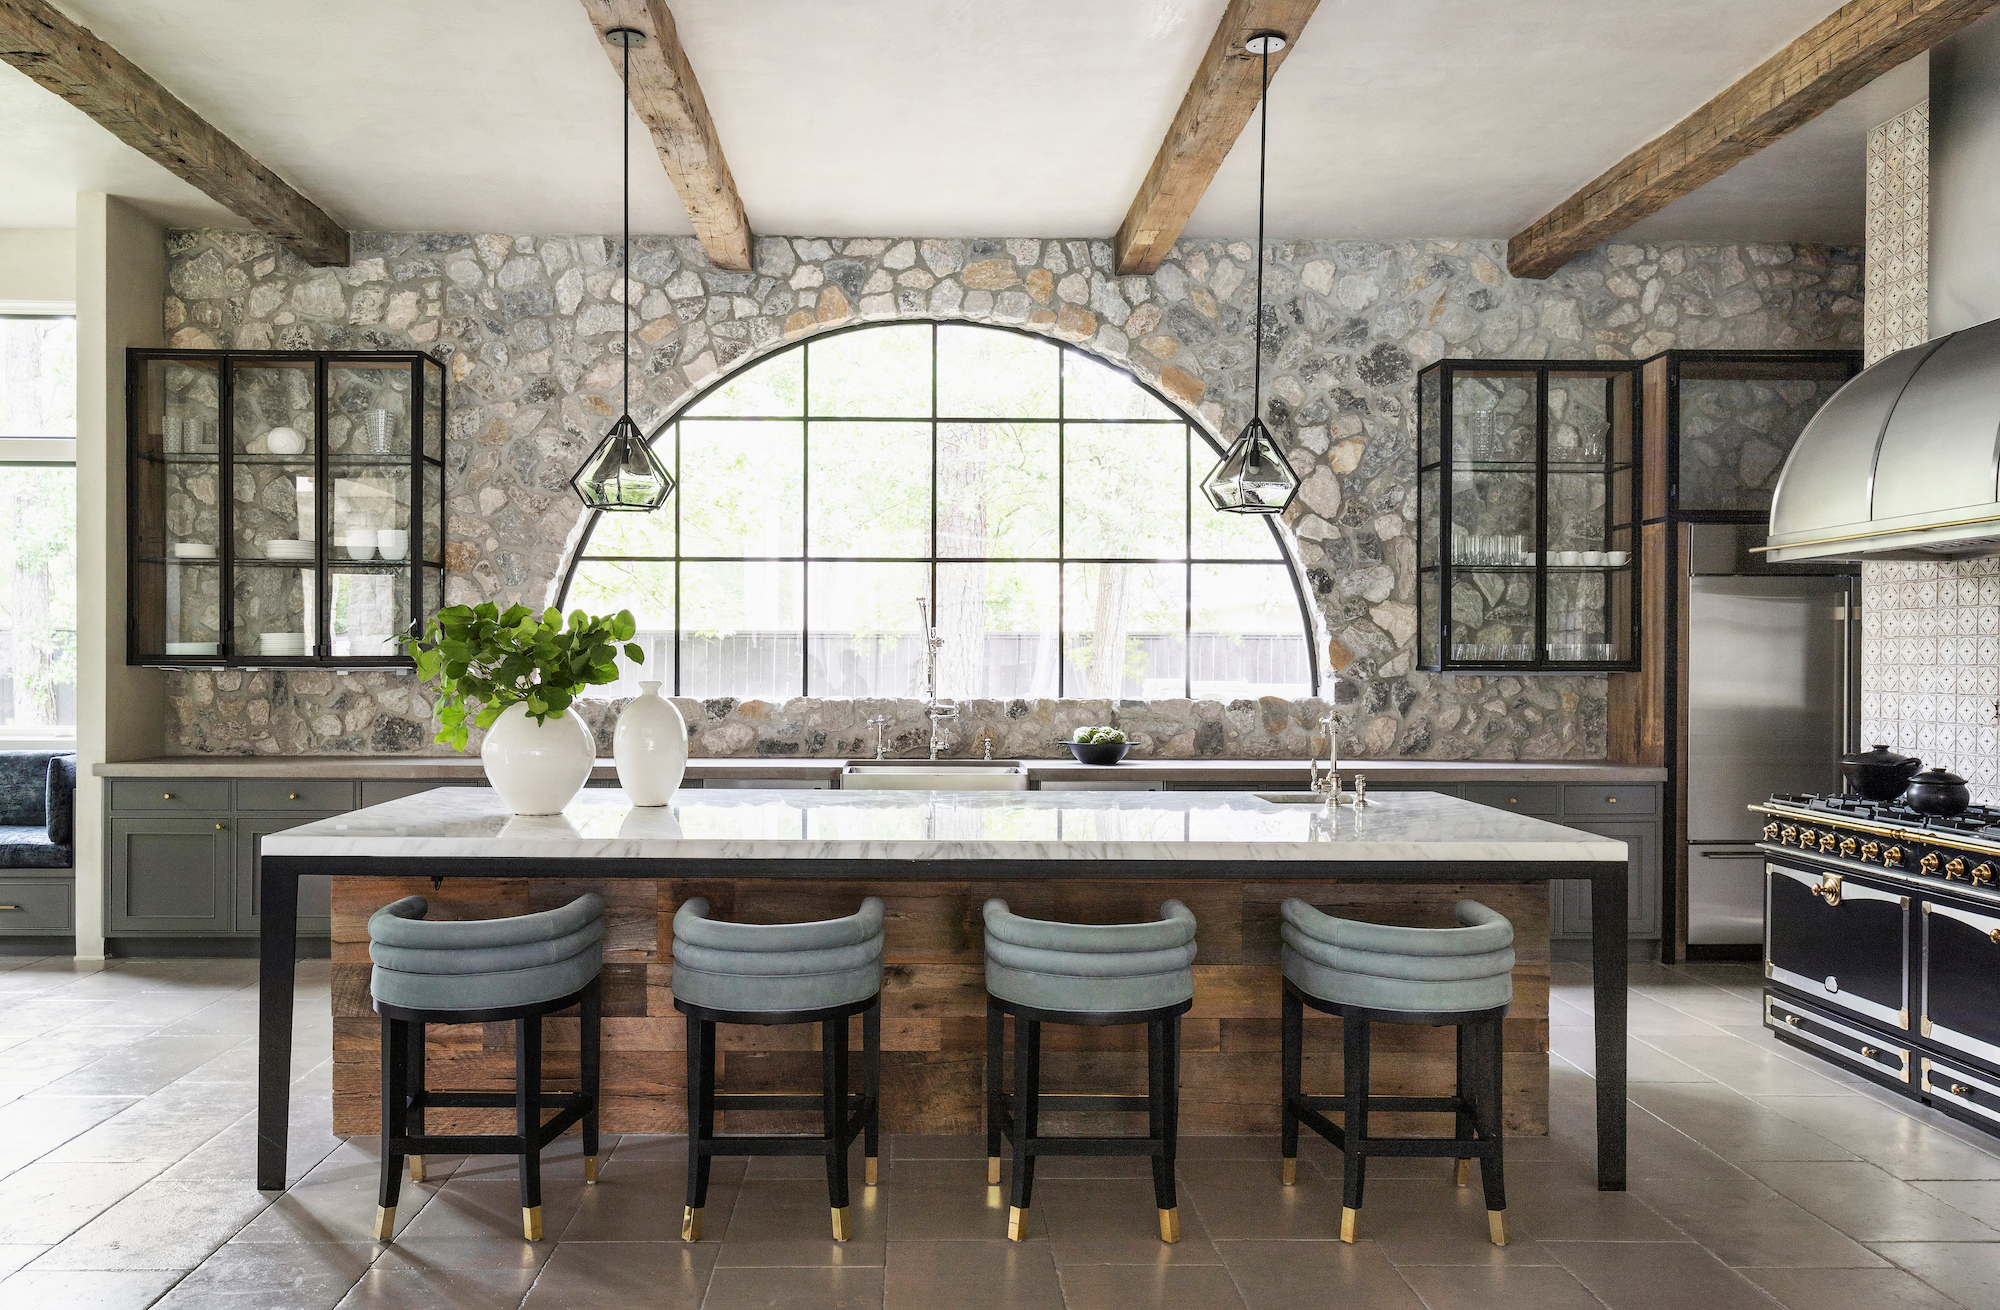 kitchen of a private residence in Houson, Texas interior designed by Nina Magon in Effect Magazine